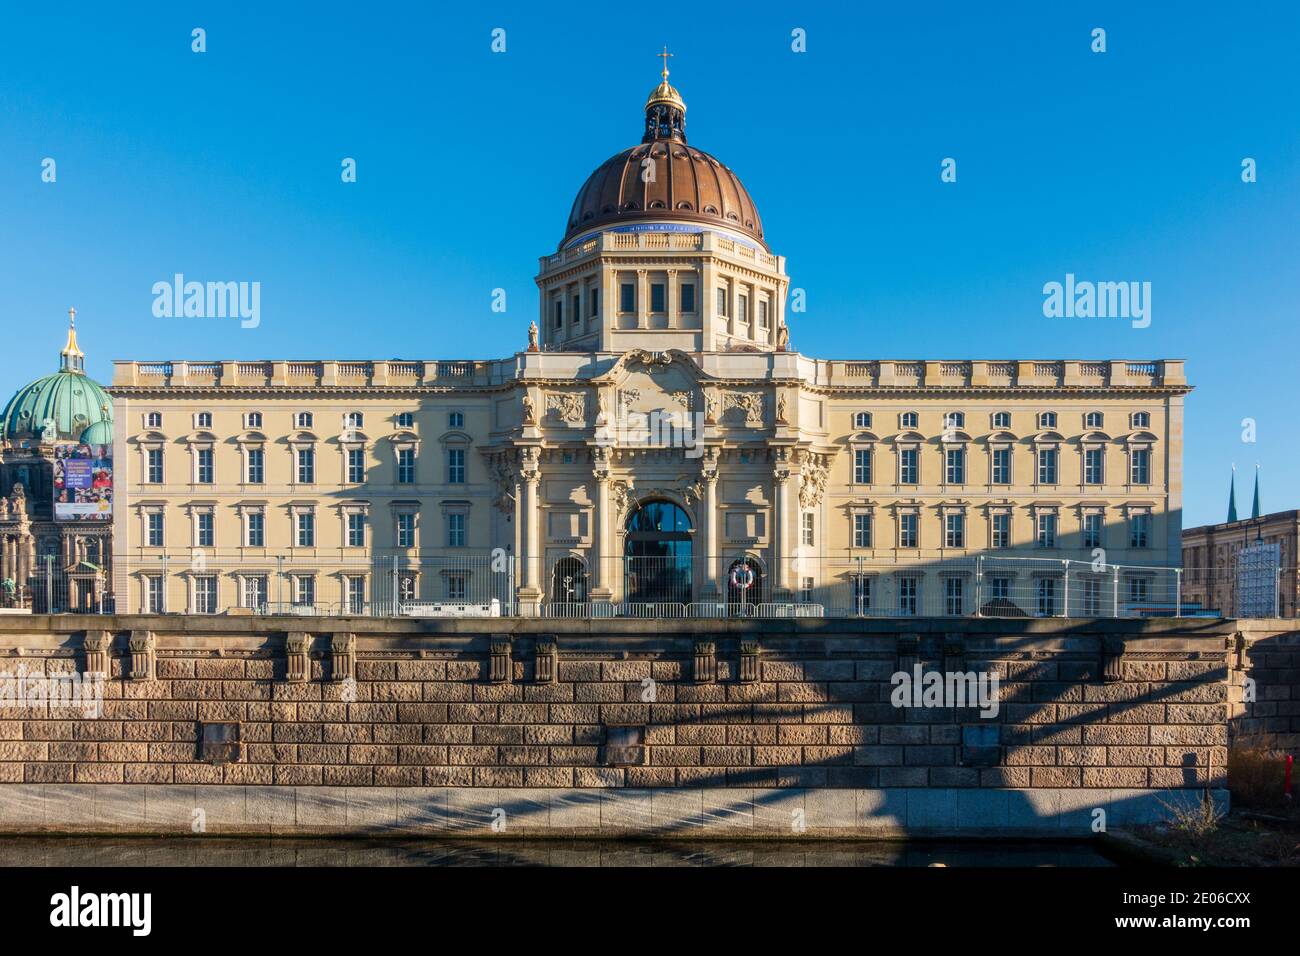 The Humboldt Forum in the rebuilt Berlin Palace Stock Photo